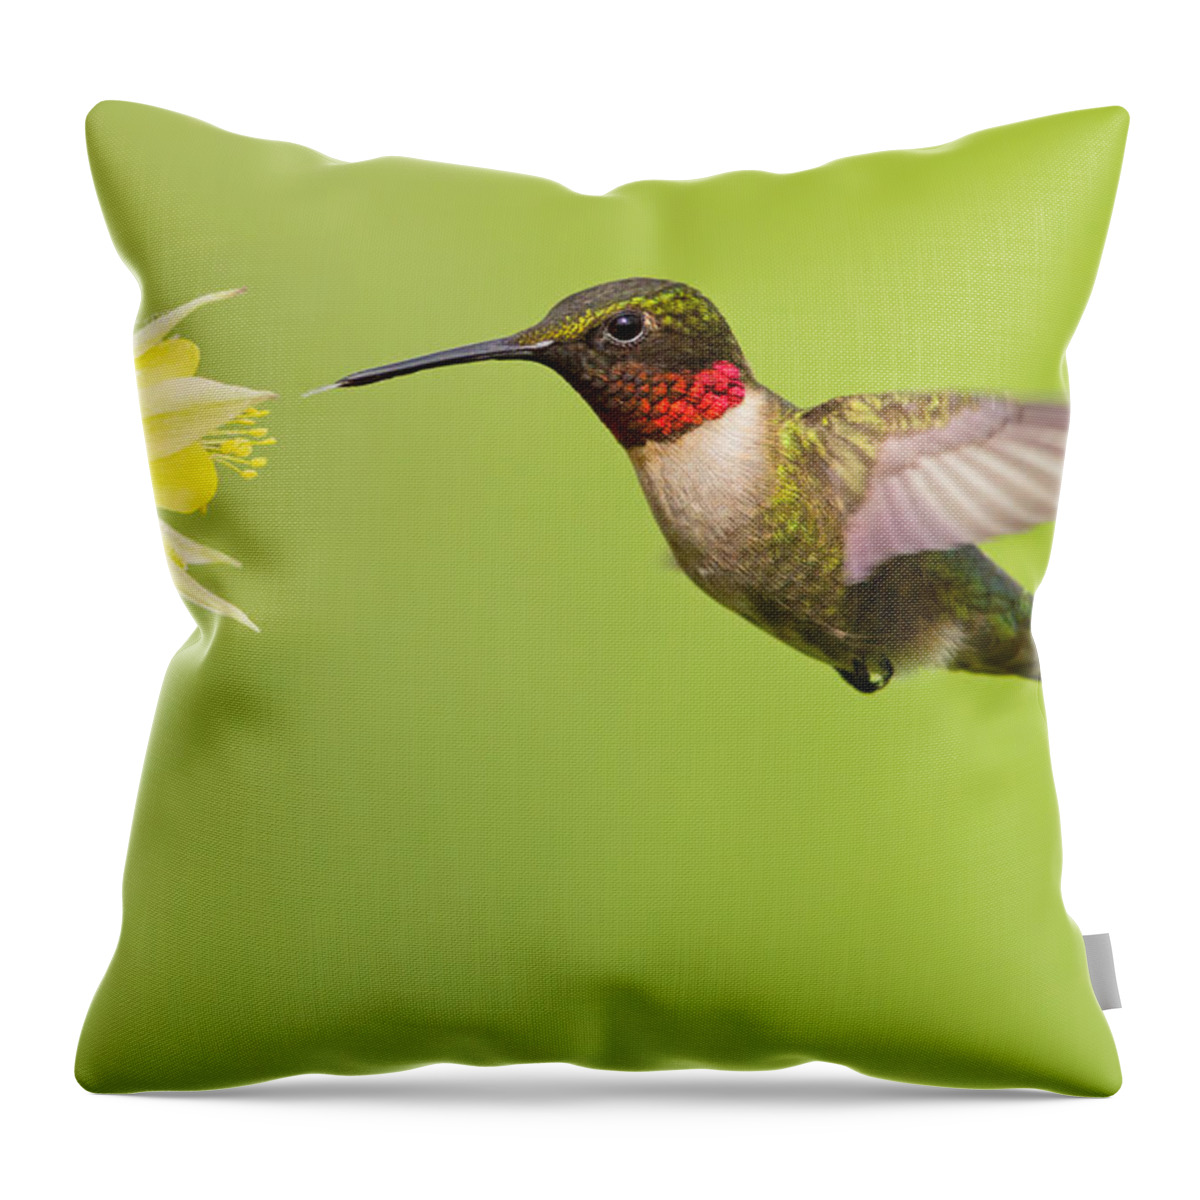 Ruby Throw Pillow featuring the photograph Ruby-Throated Hummingbird by Mircea Costina Photography